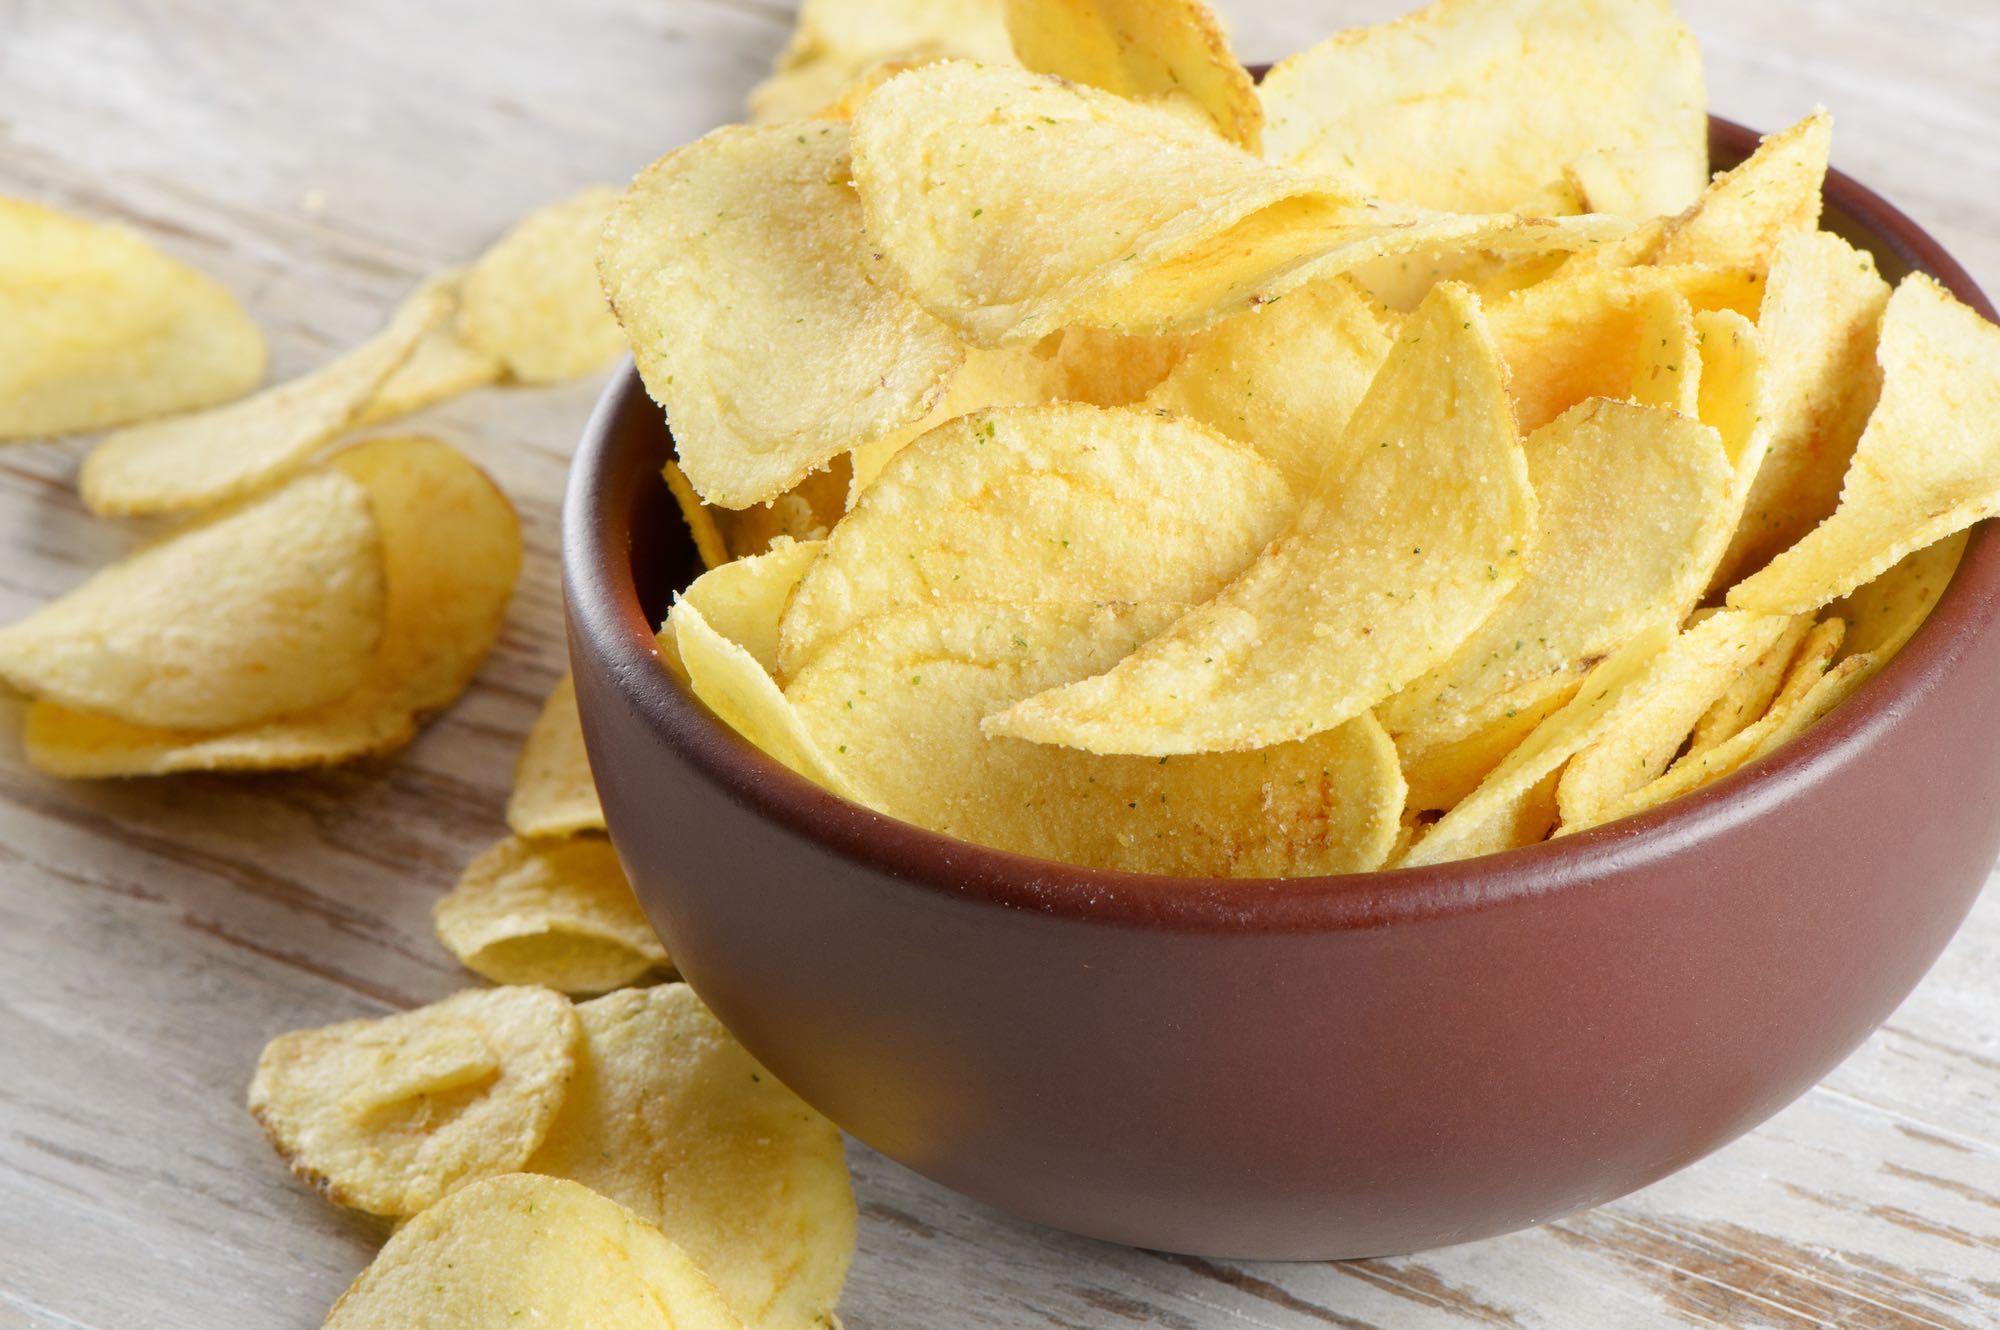 Miss Vickie's recalled chips